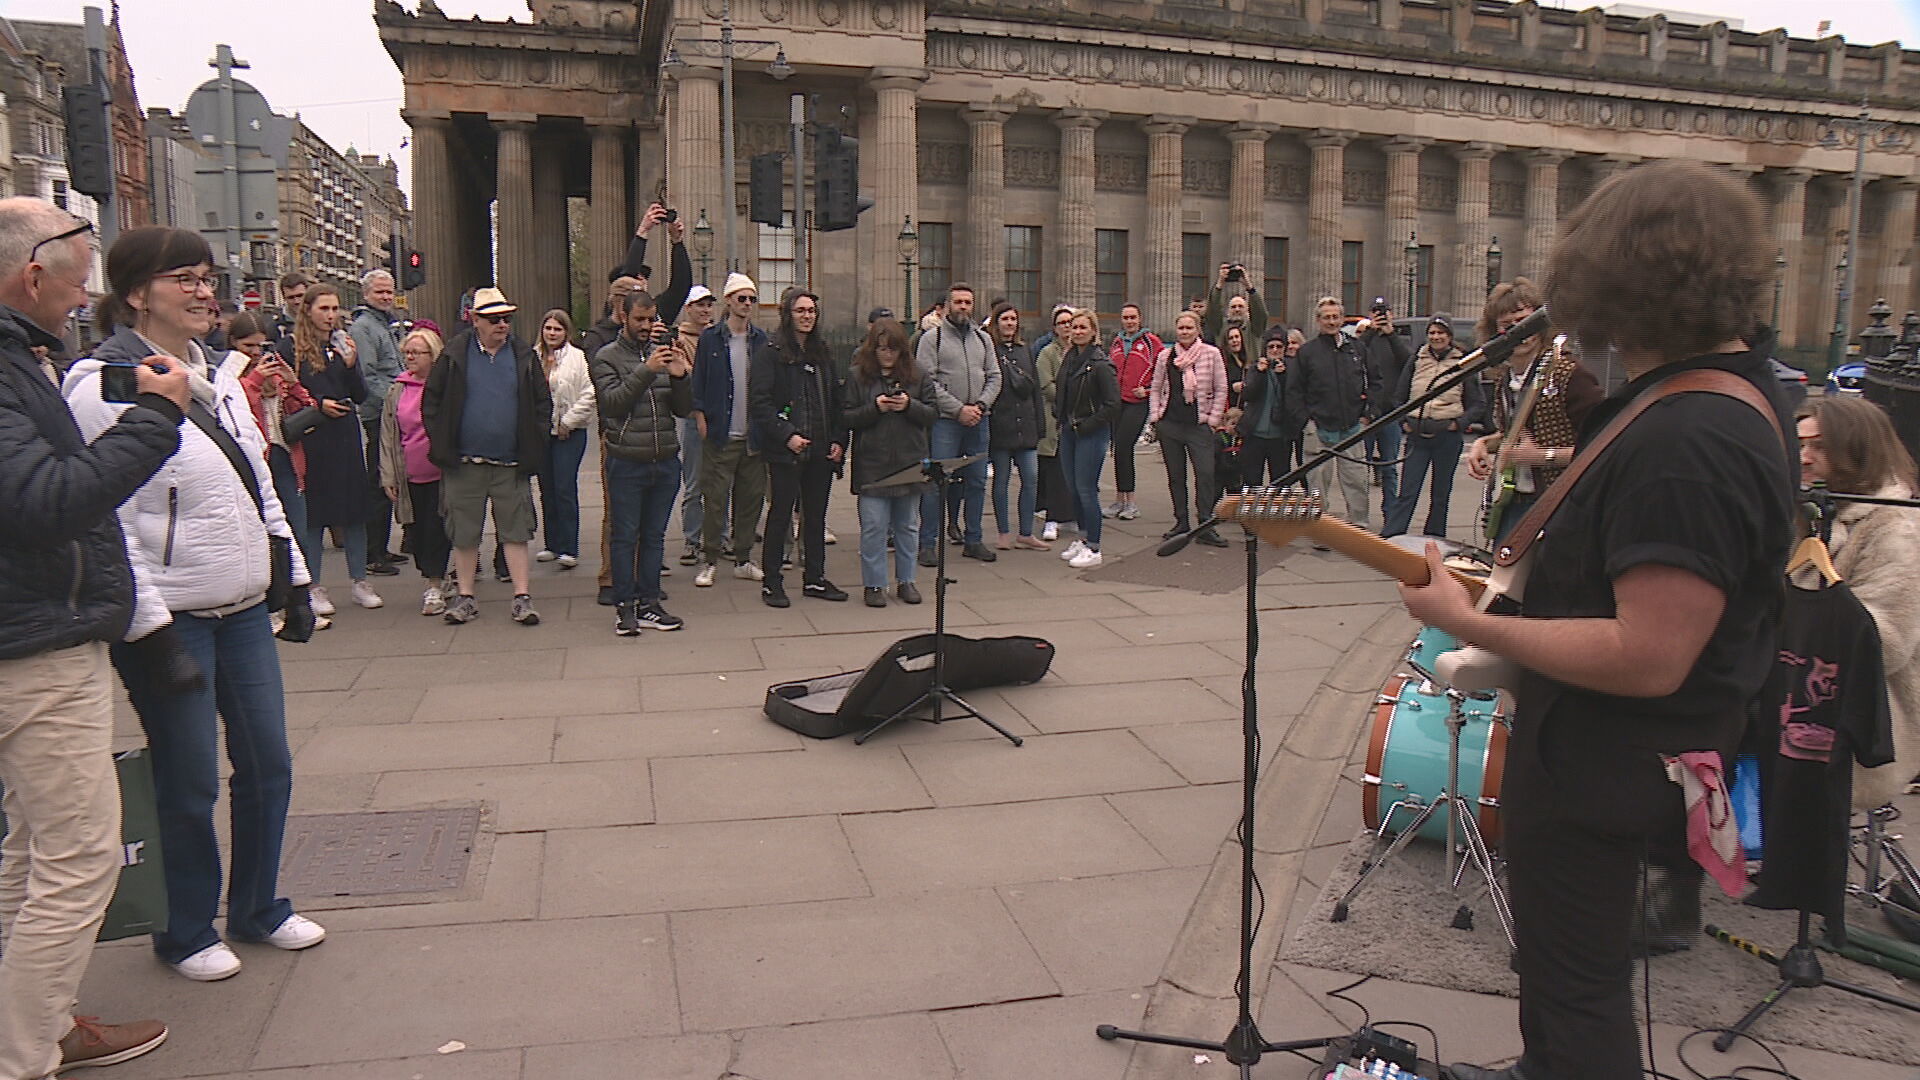 High Fade Music busking to an audience on Princes Street in Edinburgh. 